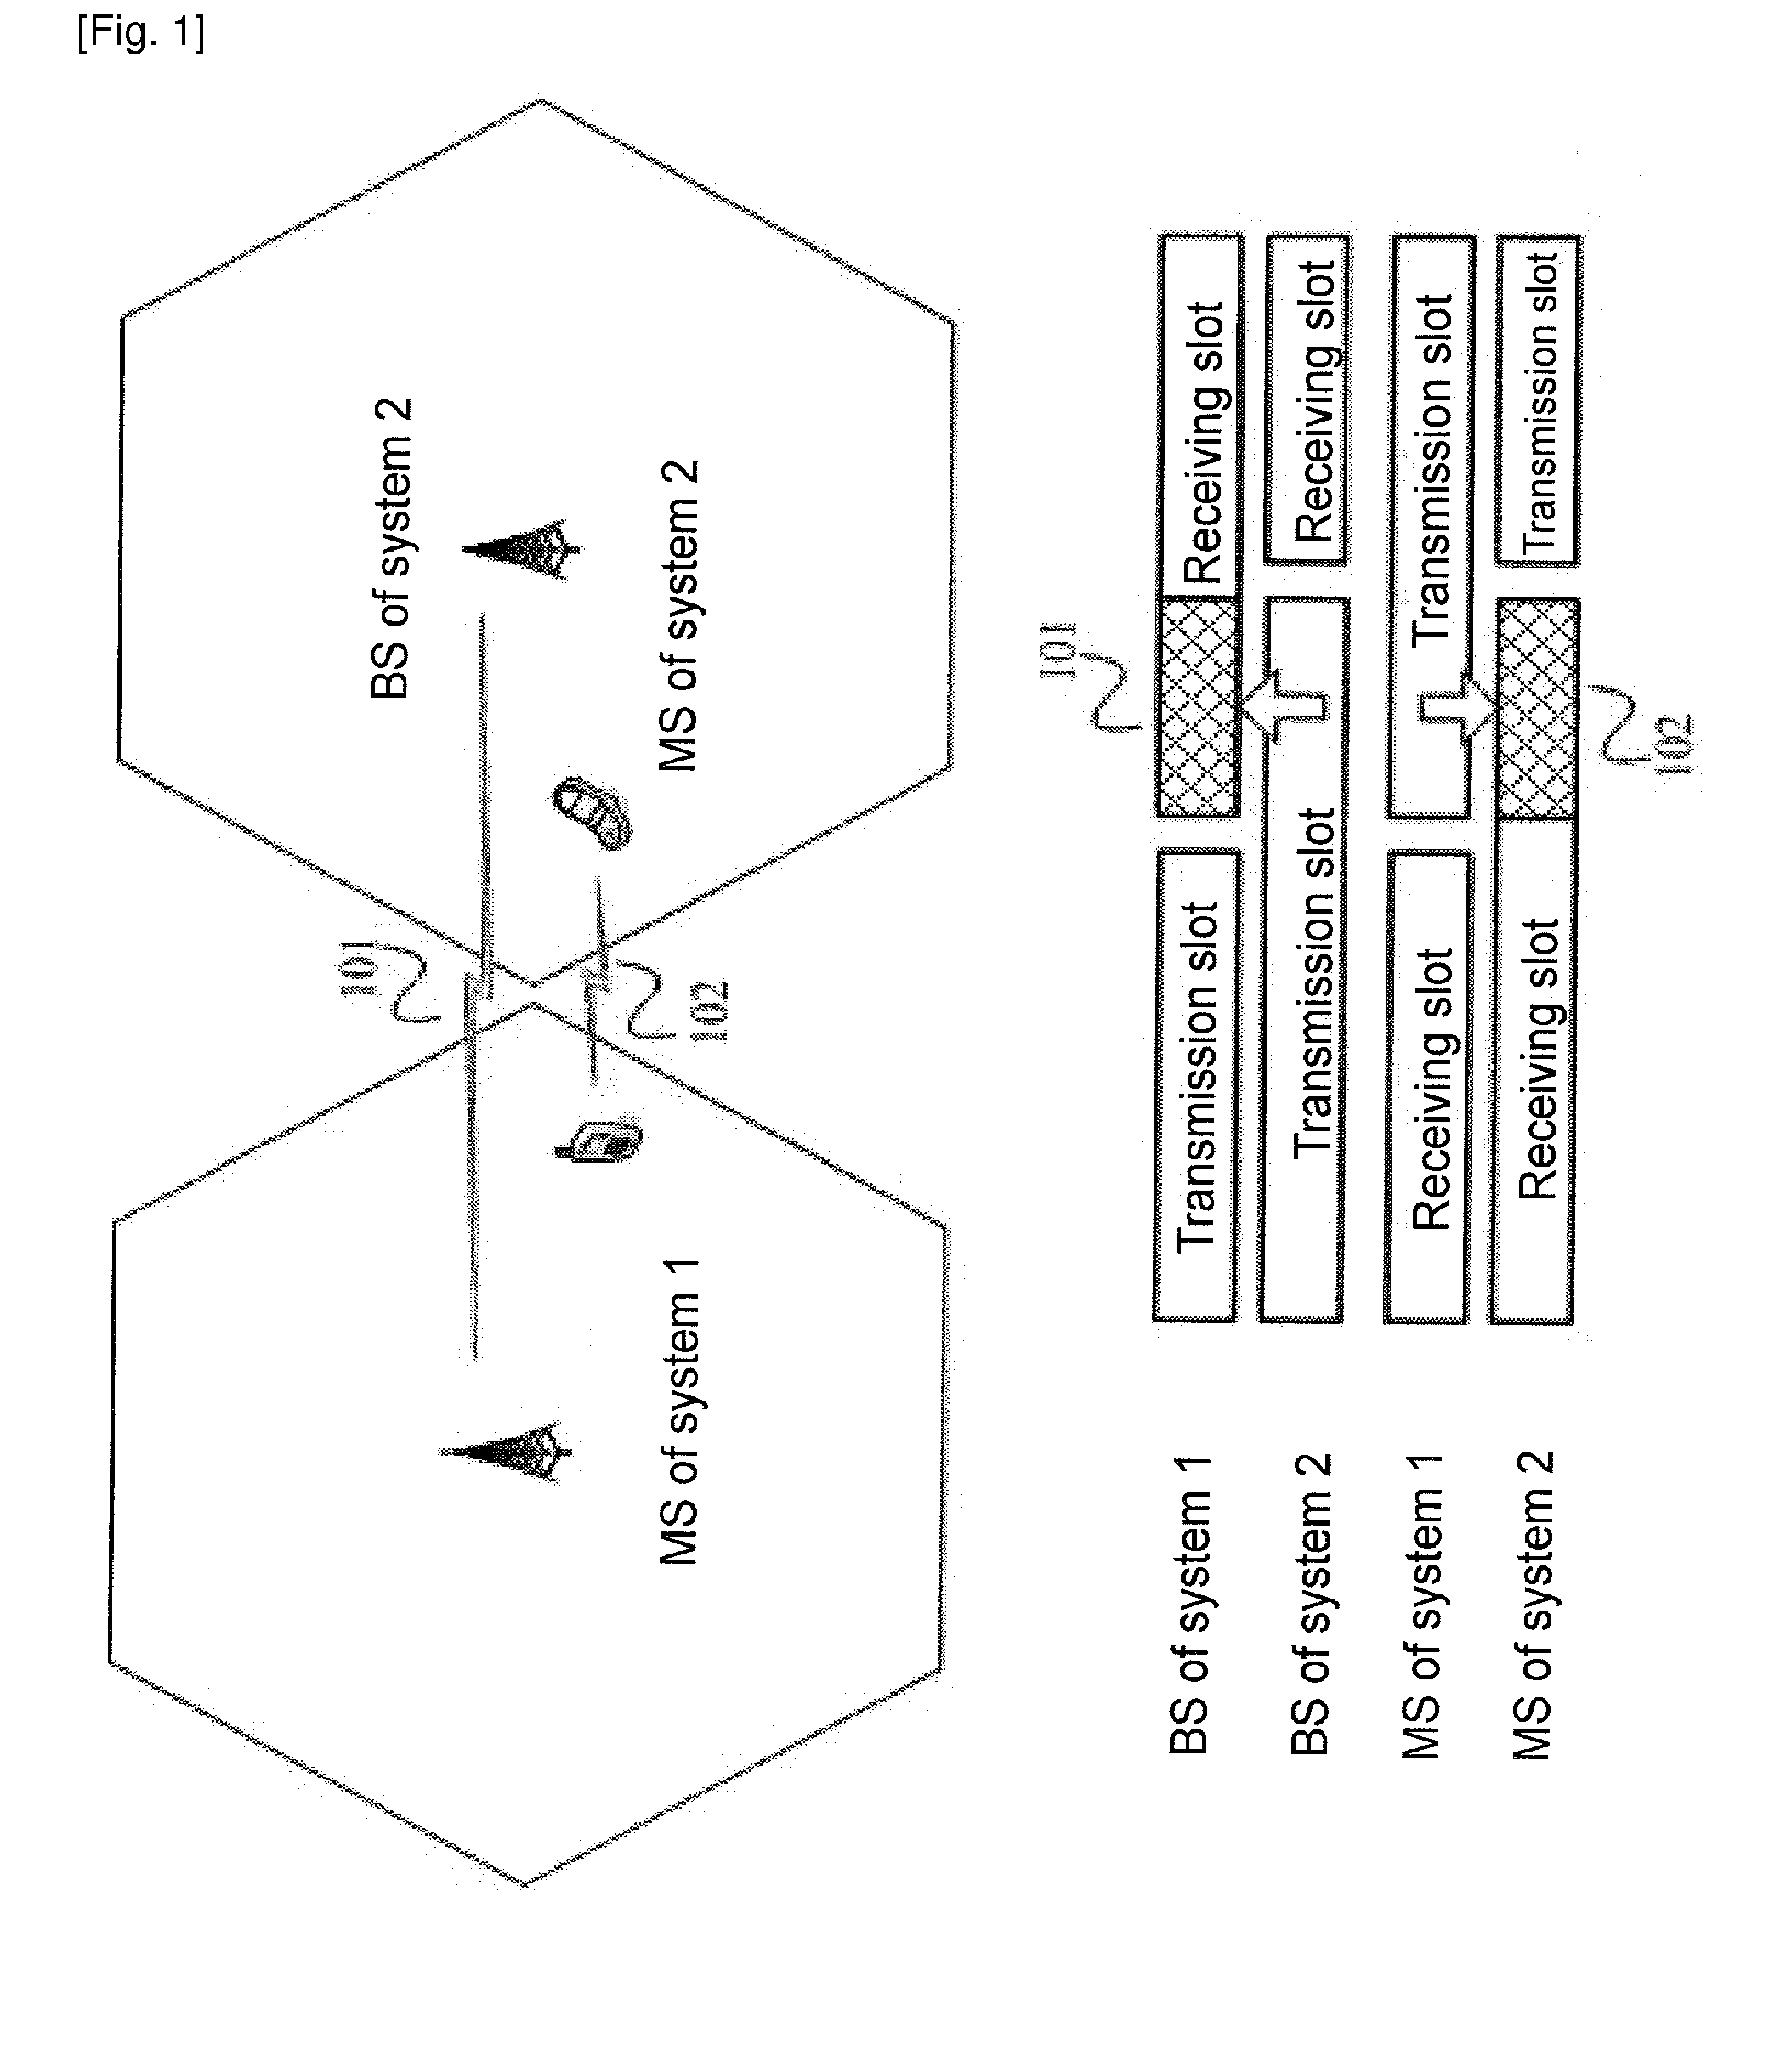 Method for multiple TDD systems coexistence